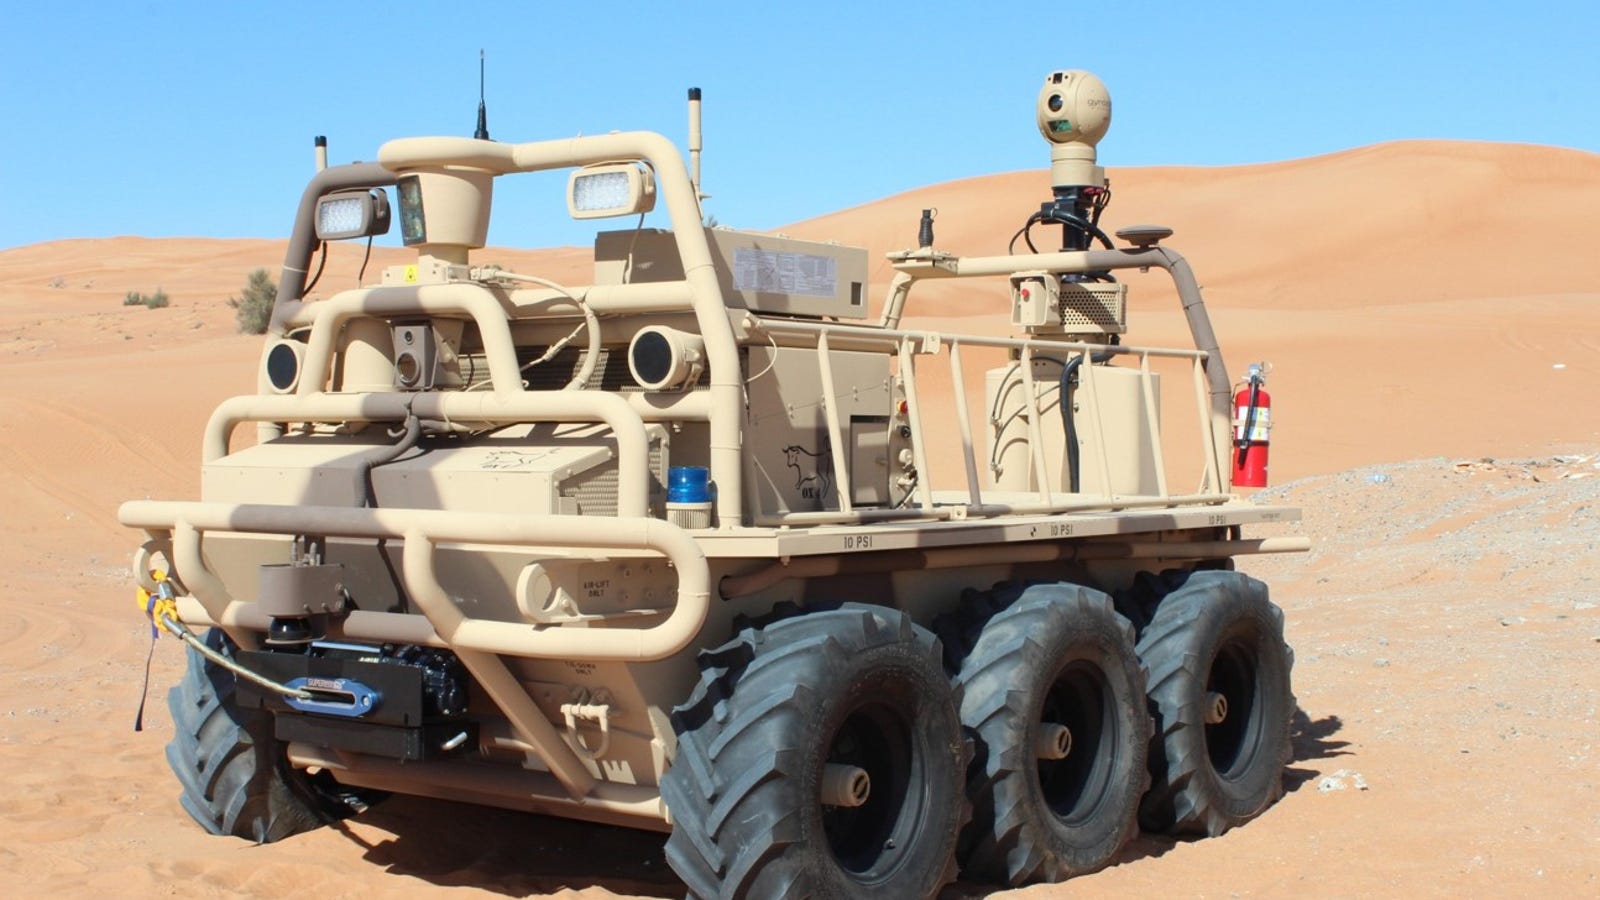 Lockheed Martins Autonomous Military Vehicles Aim To Save Lives In A Different Way 1184